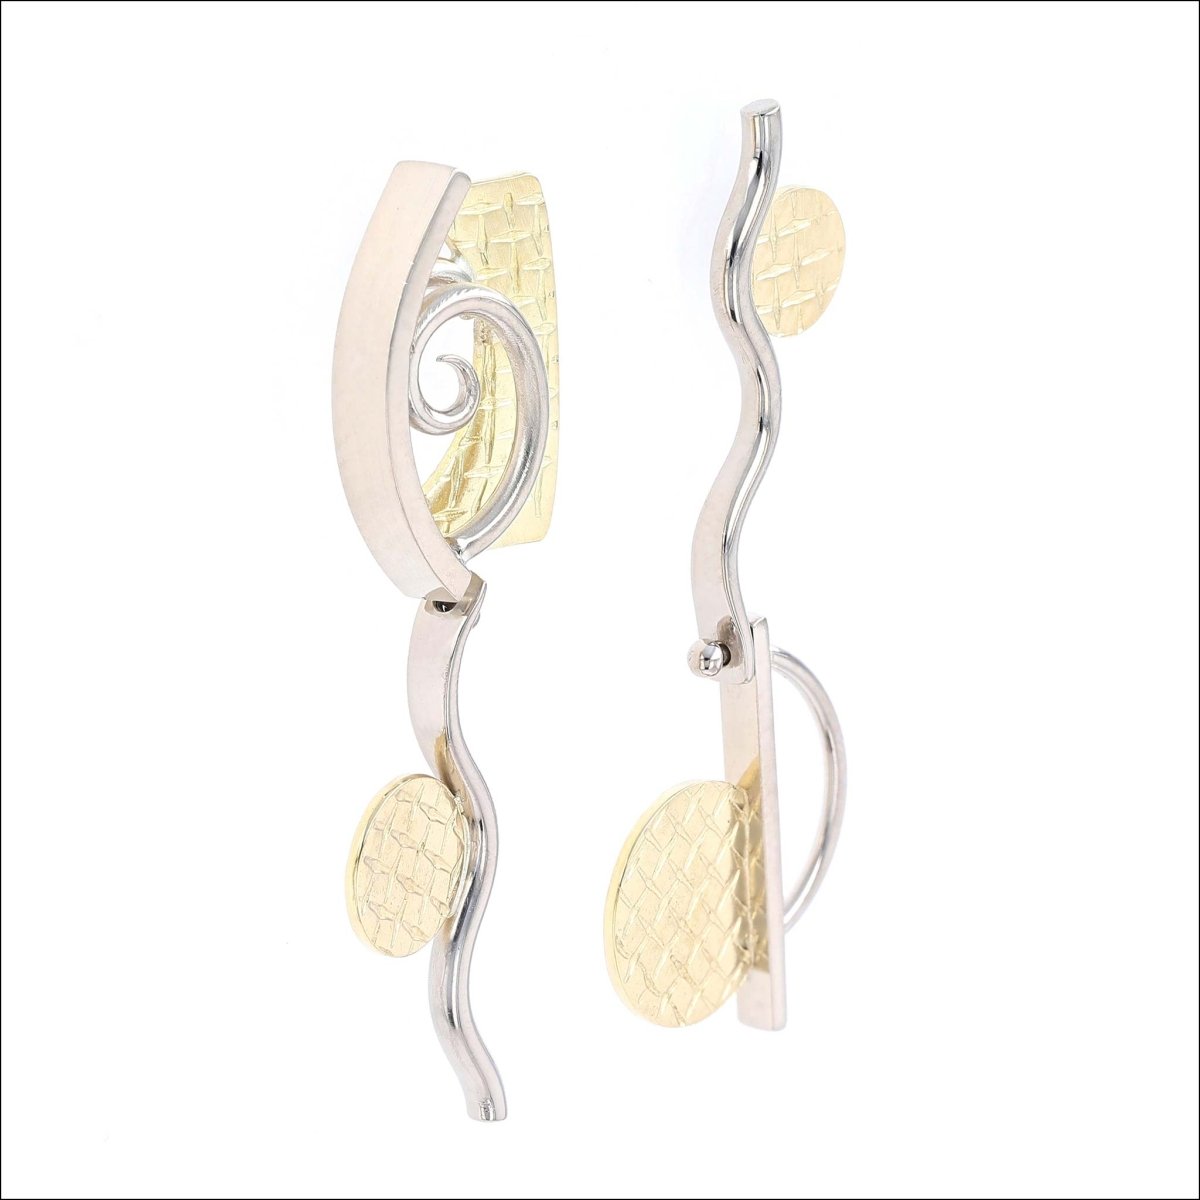 Asymmetrical Spiral Circle "Parts" Earrings 18KY 14KW Entry #3 - JewelsmithEarrings